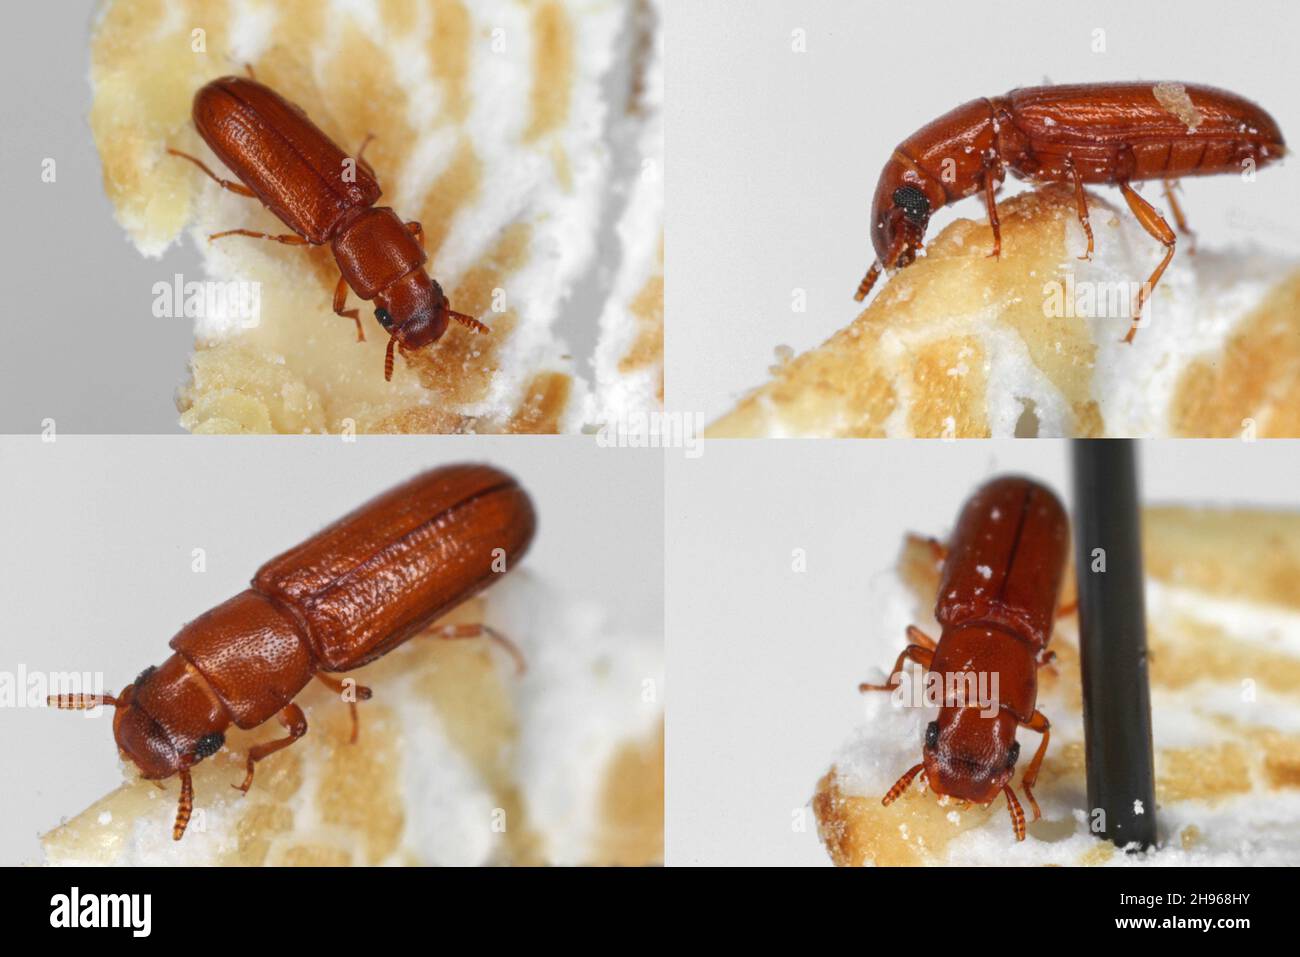 Latheticus oryzae common name Long headed Flour Beetle in the family Tenebrionidae, the darkling beetles. Stock Photo